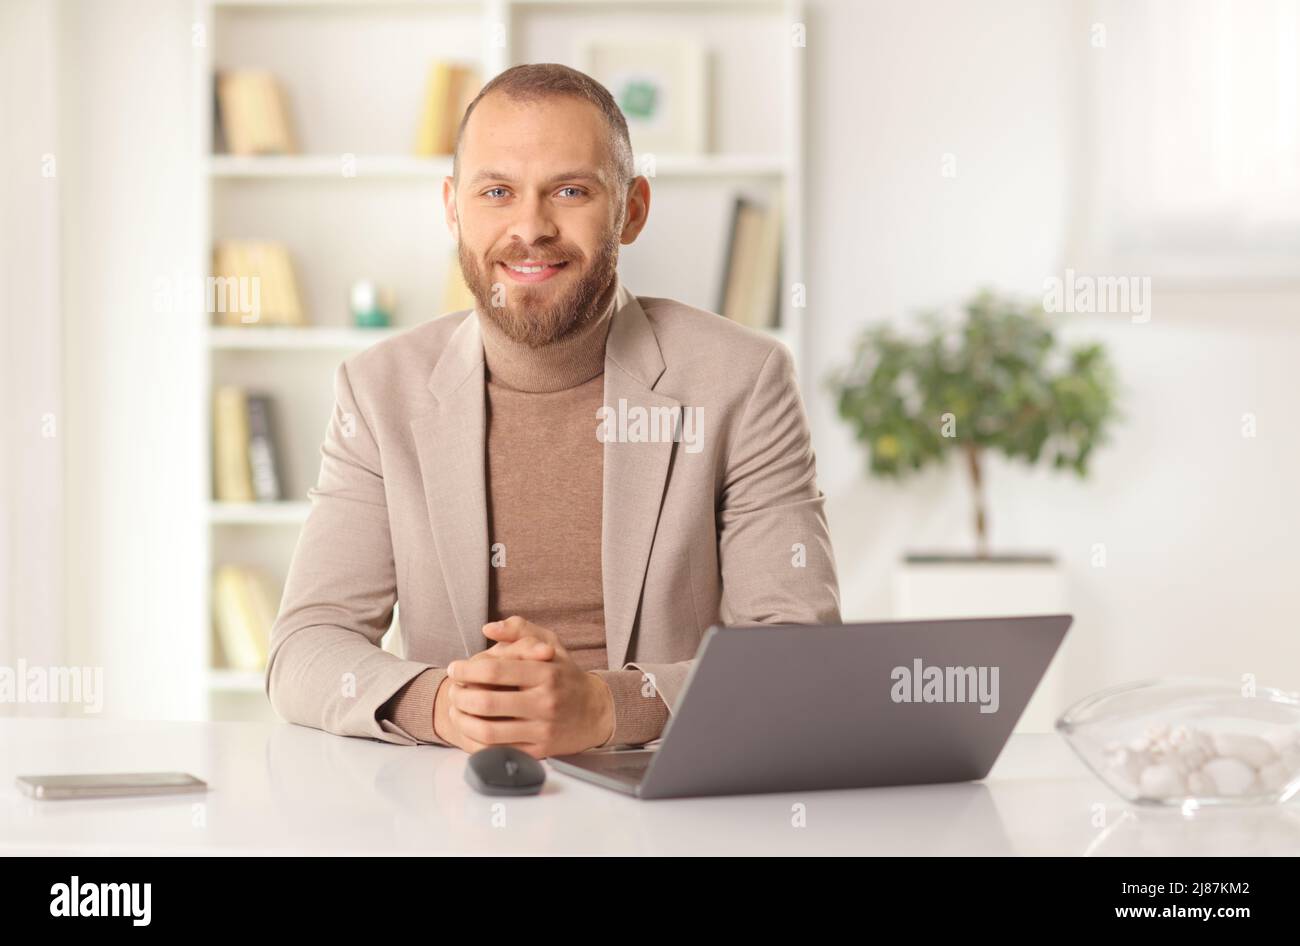 Young man sitting at table with a laptop computer and looking at camera Stock Photo